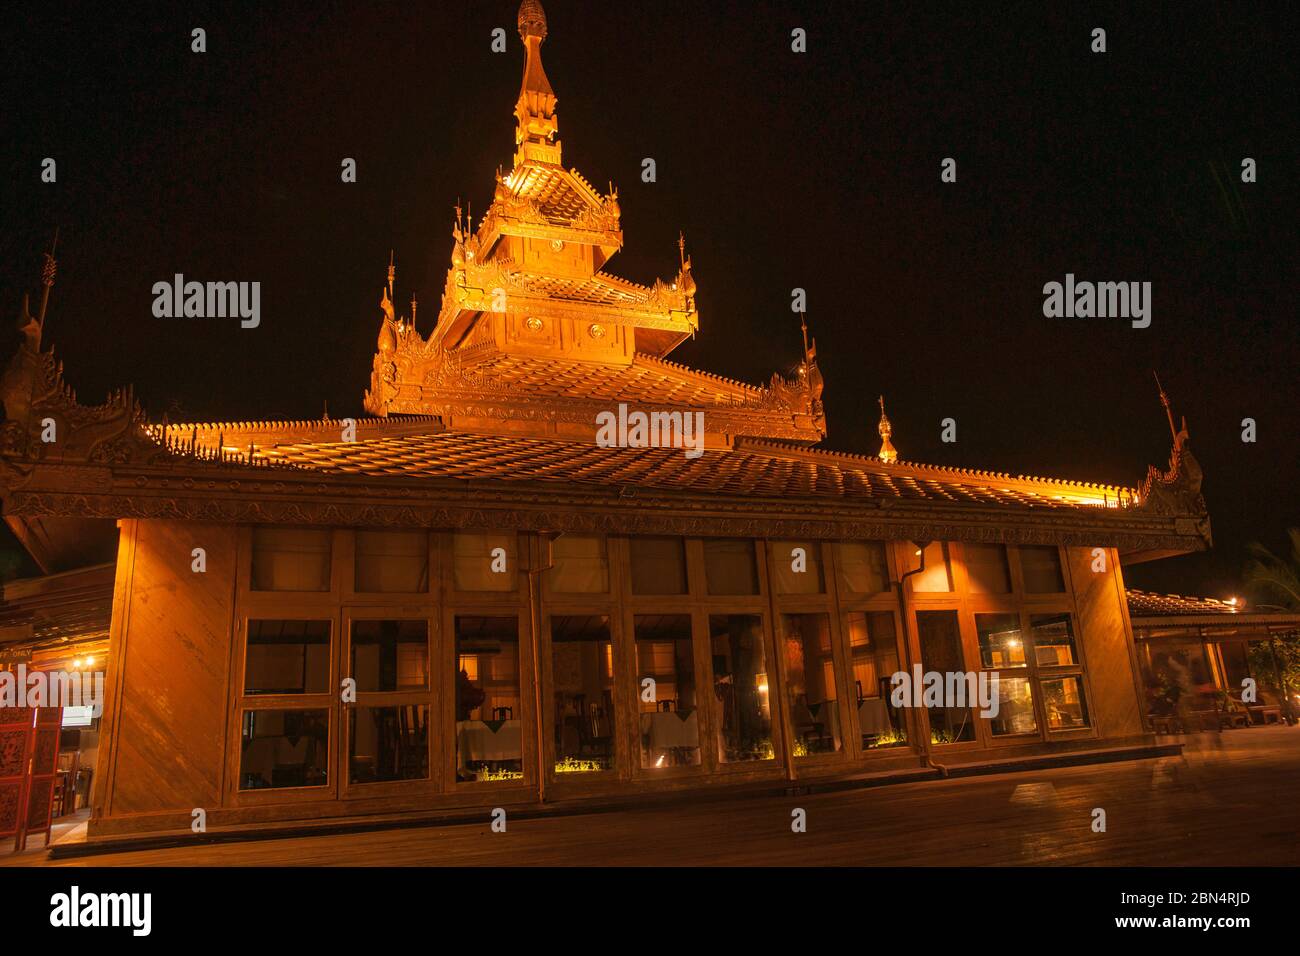 Asian architecture at night, with traditional style and features illuminated against dark sky in Bagan, Myanmar. Stock Photo